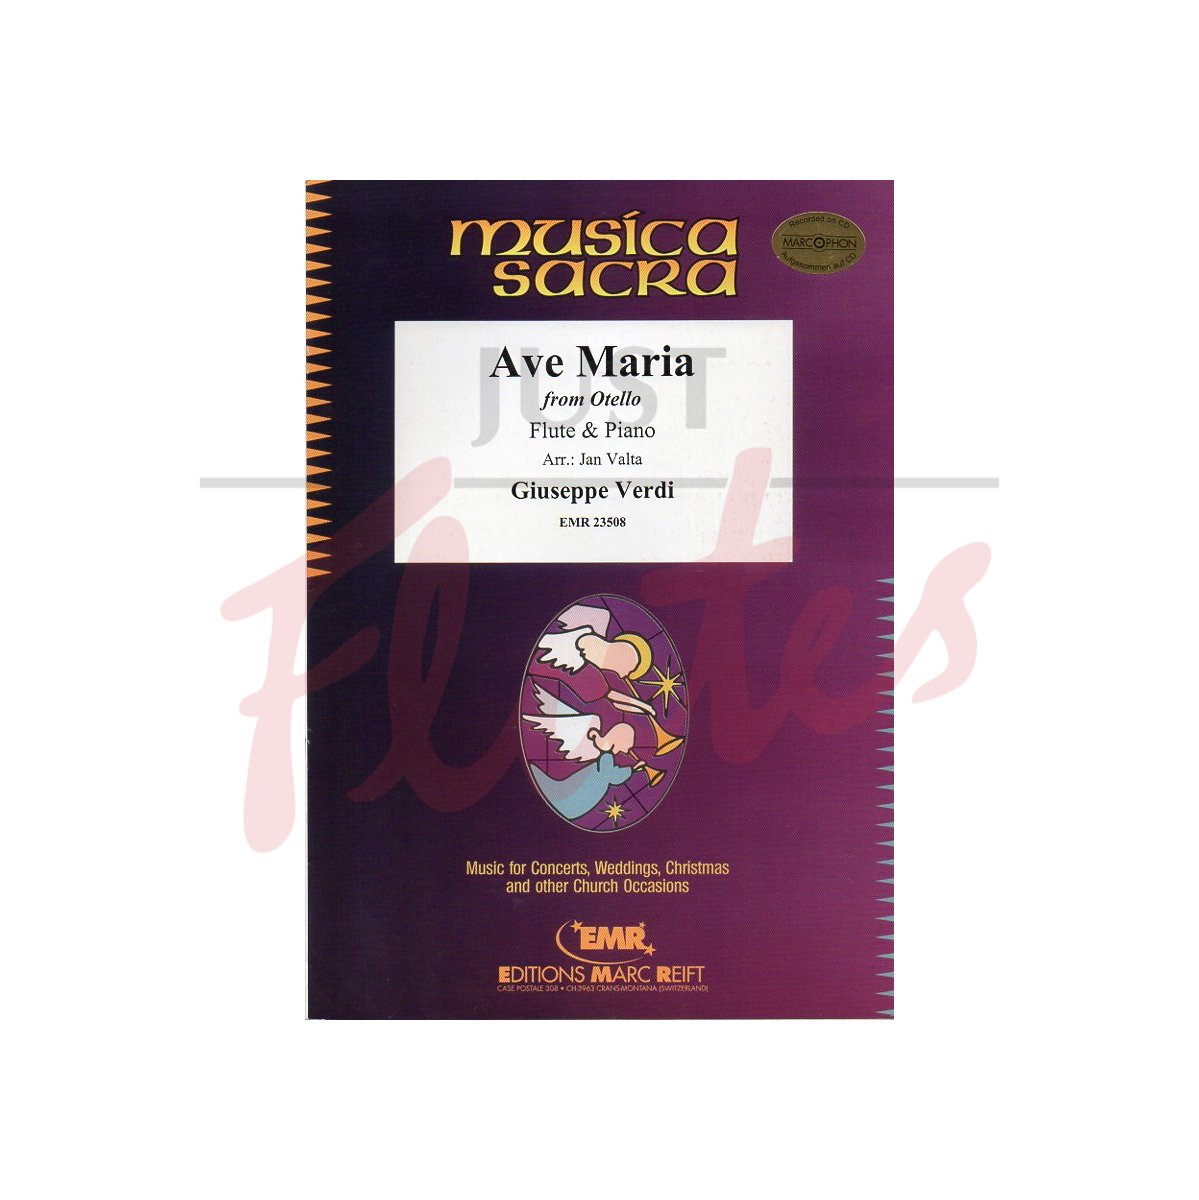 Ave Maria from Otello for Flute and Piano